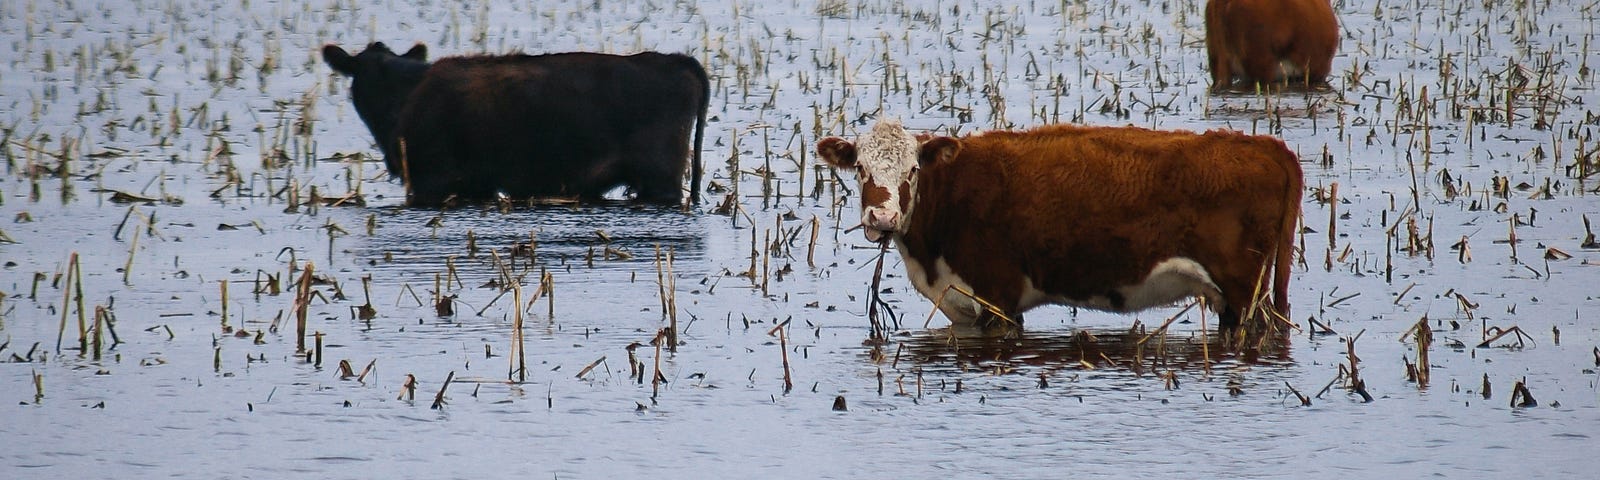 Cows stand in a flooded field